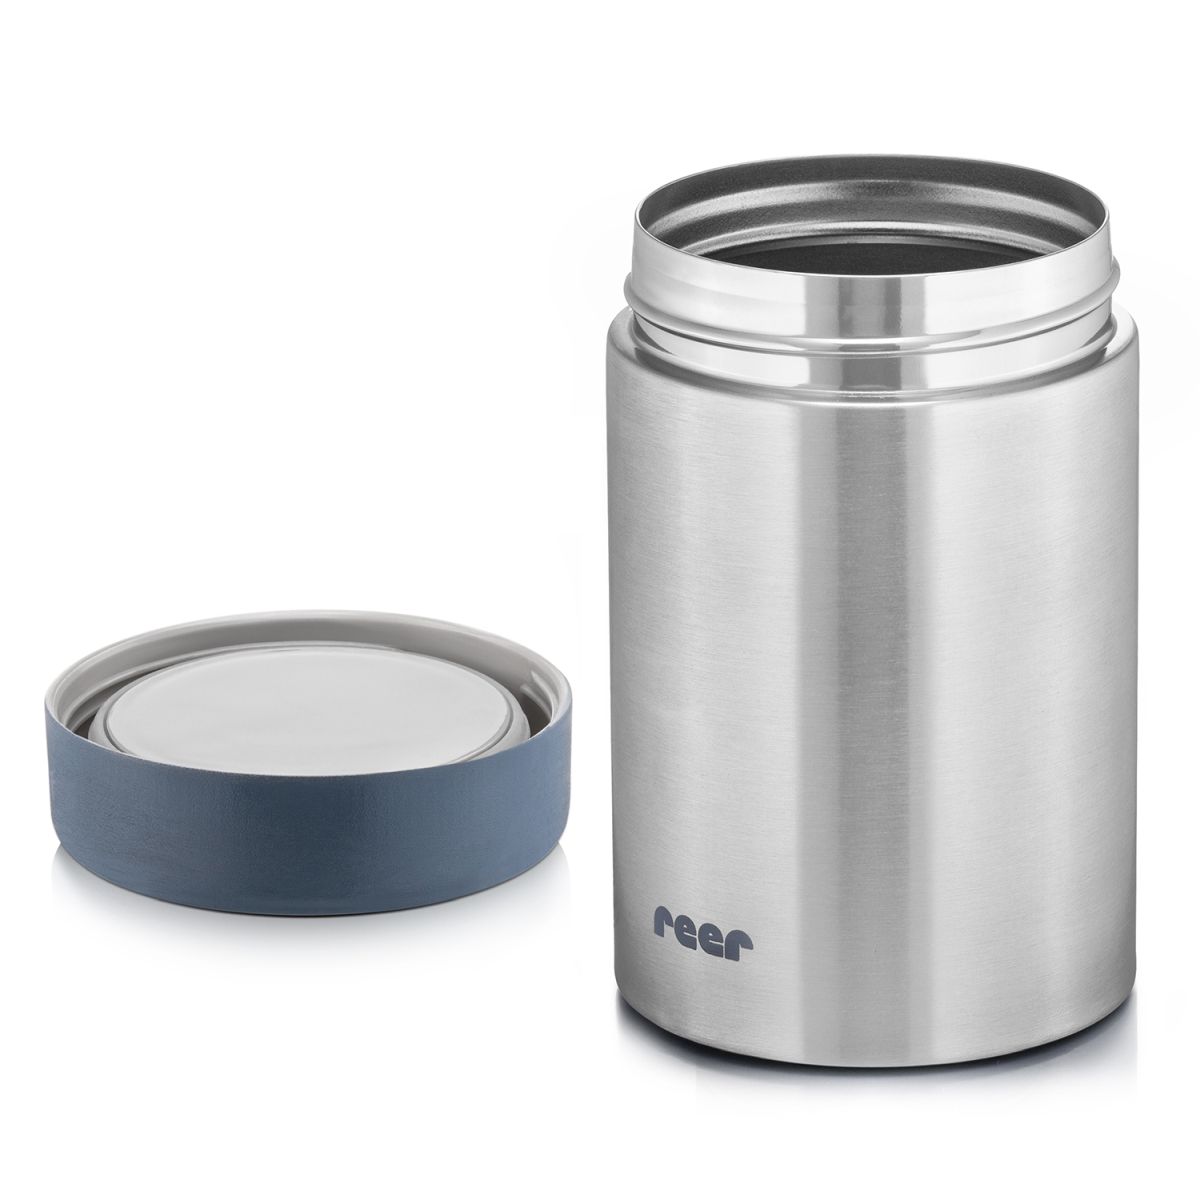 Pure stainless steel insulated storage box, 300 ml